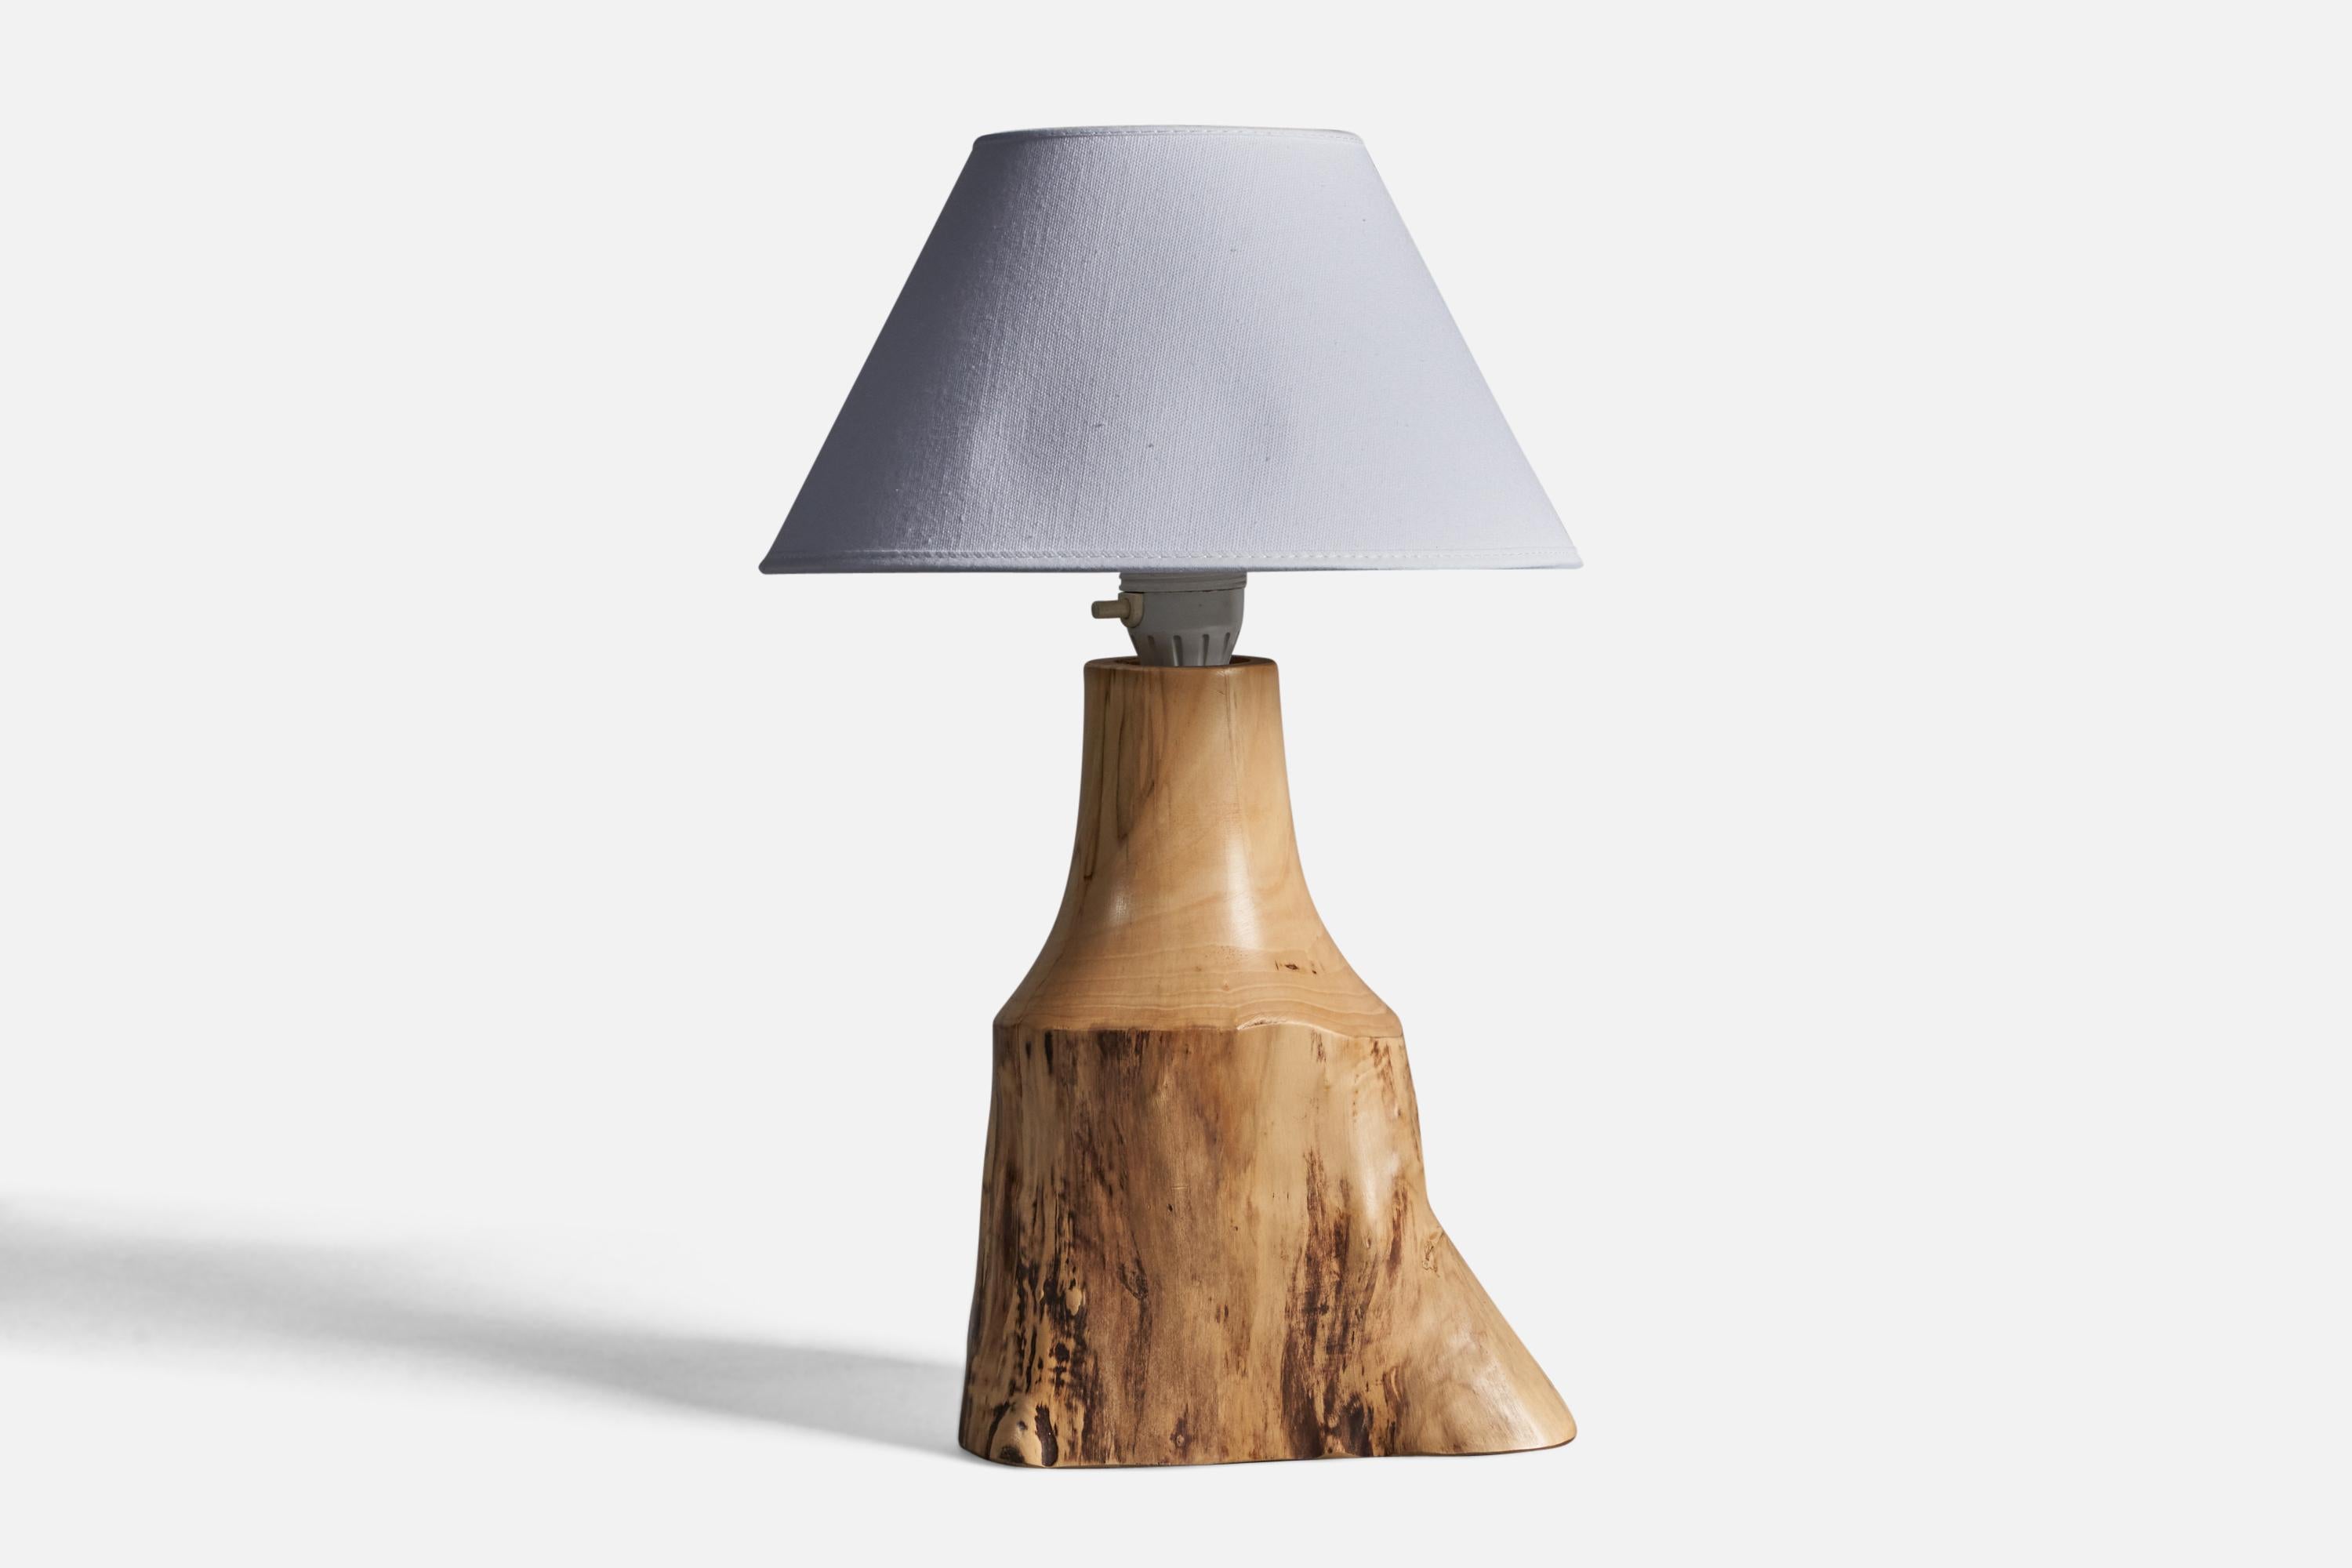 A freeform cottonwood table lamp designed and produced by Sigvard Nilsson, Sweden, 1970s

Dimensions of Lamp (inches): 12.25